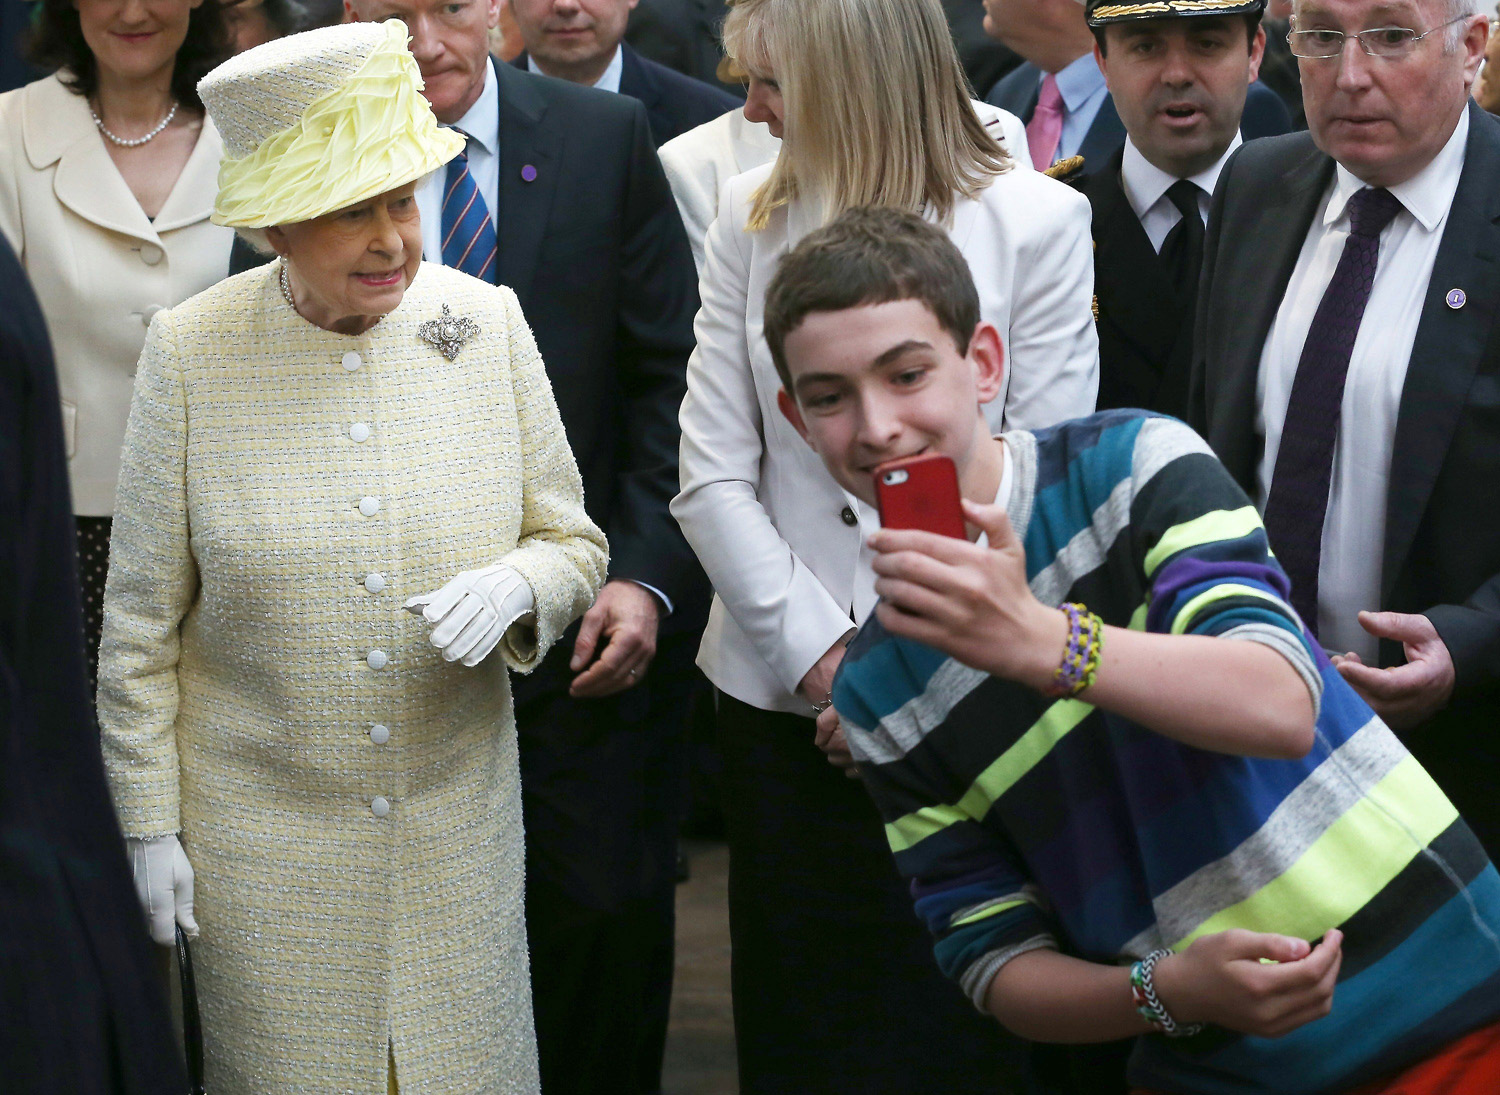 A local youth takes a selfie in front of Queen Elizabeth II during a visit to St. George's indoor market in Belfast, Northern Ireland on June 24, 2014.